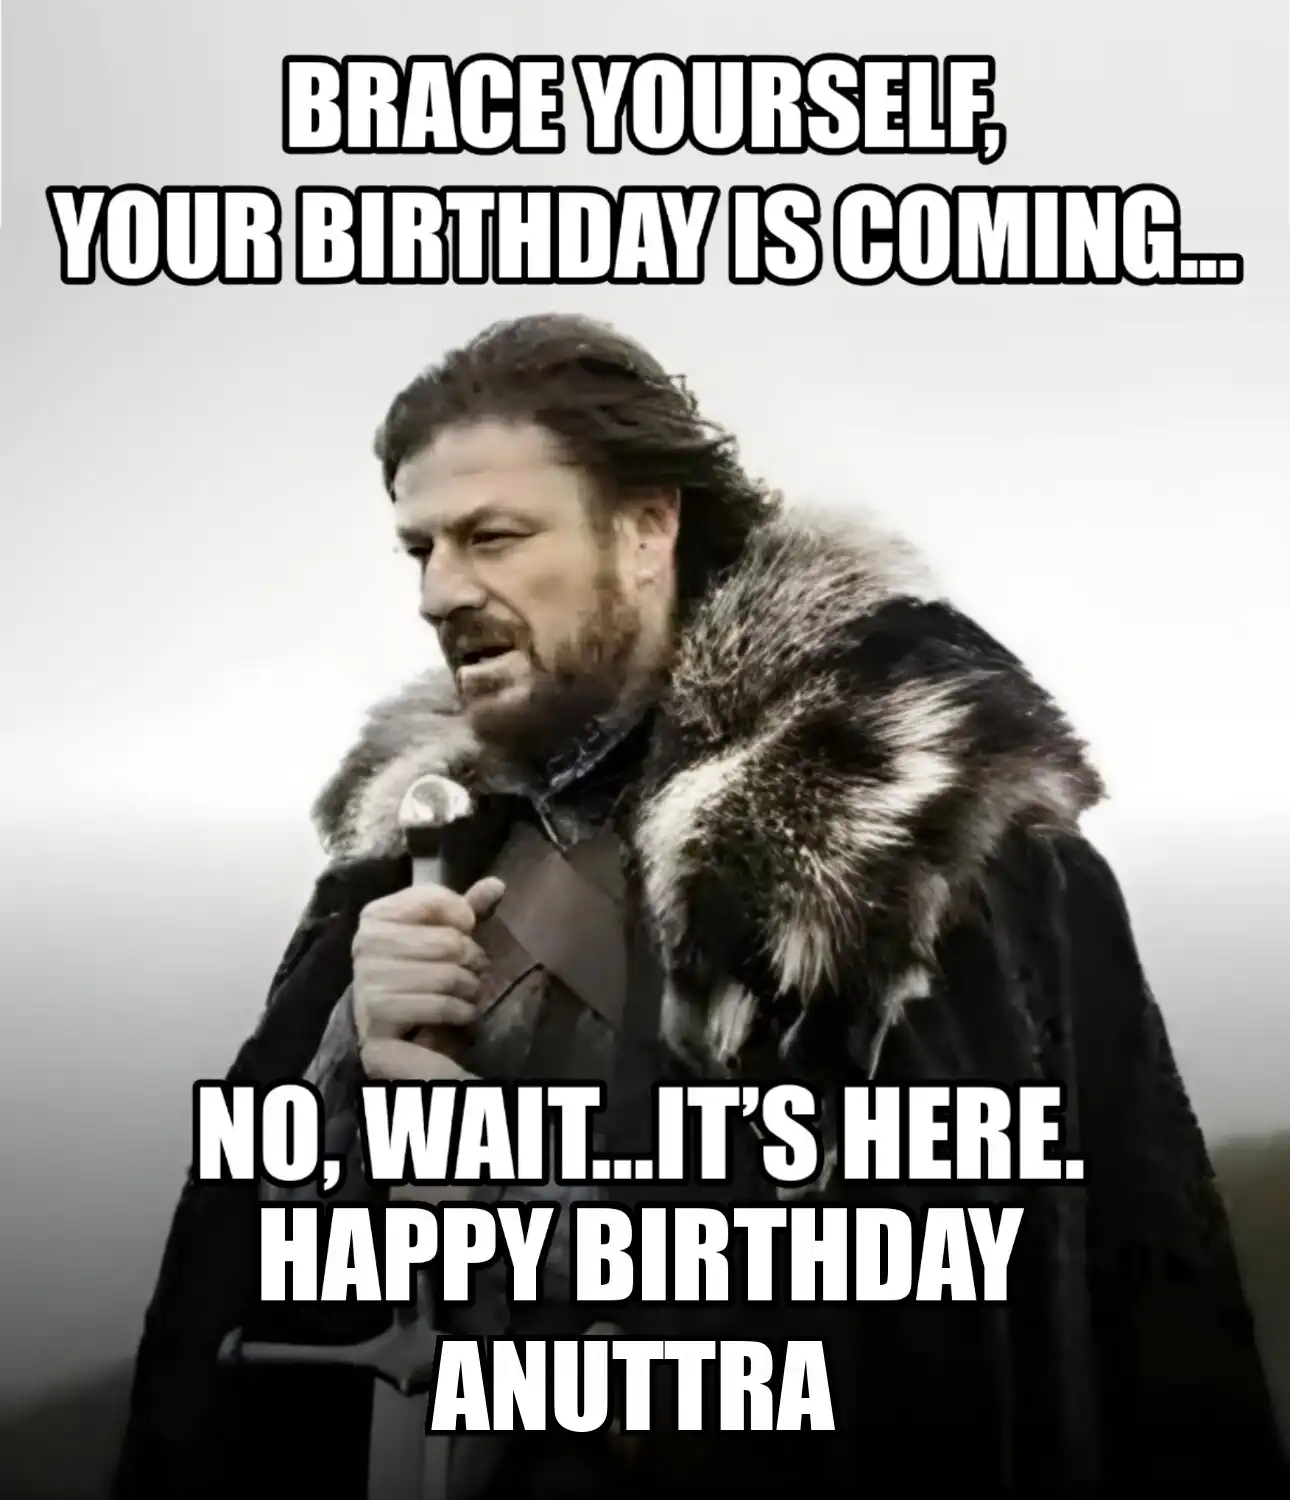 Happy Birthday Anuttra Brace Yourself Your Birthday Is Coming Meme